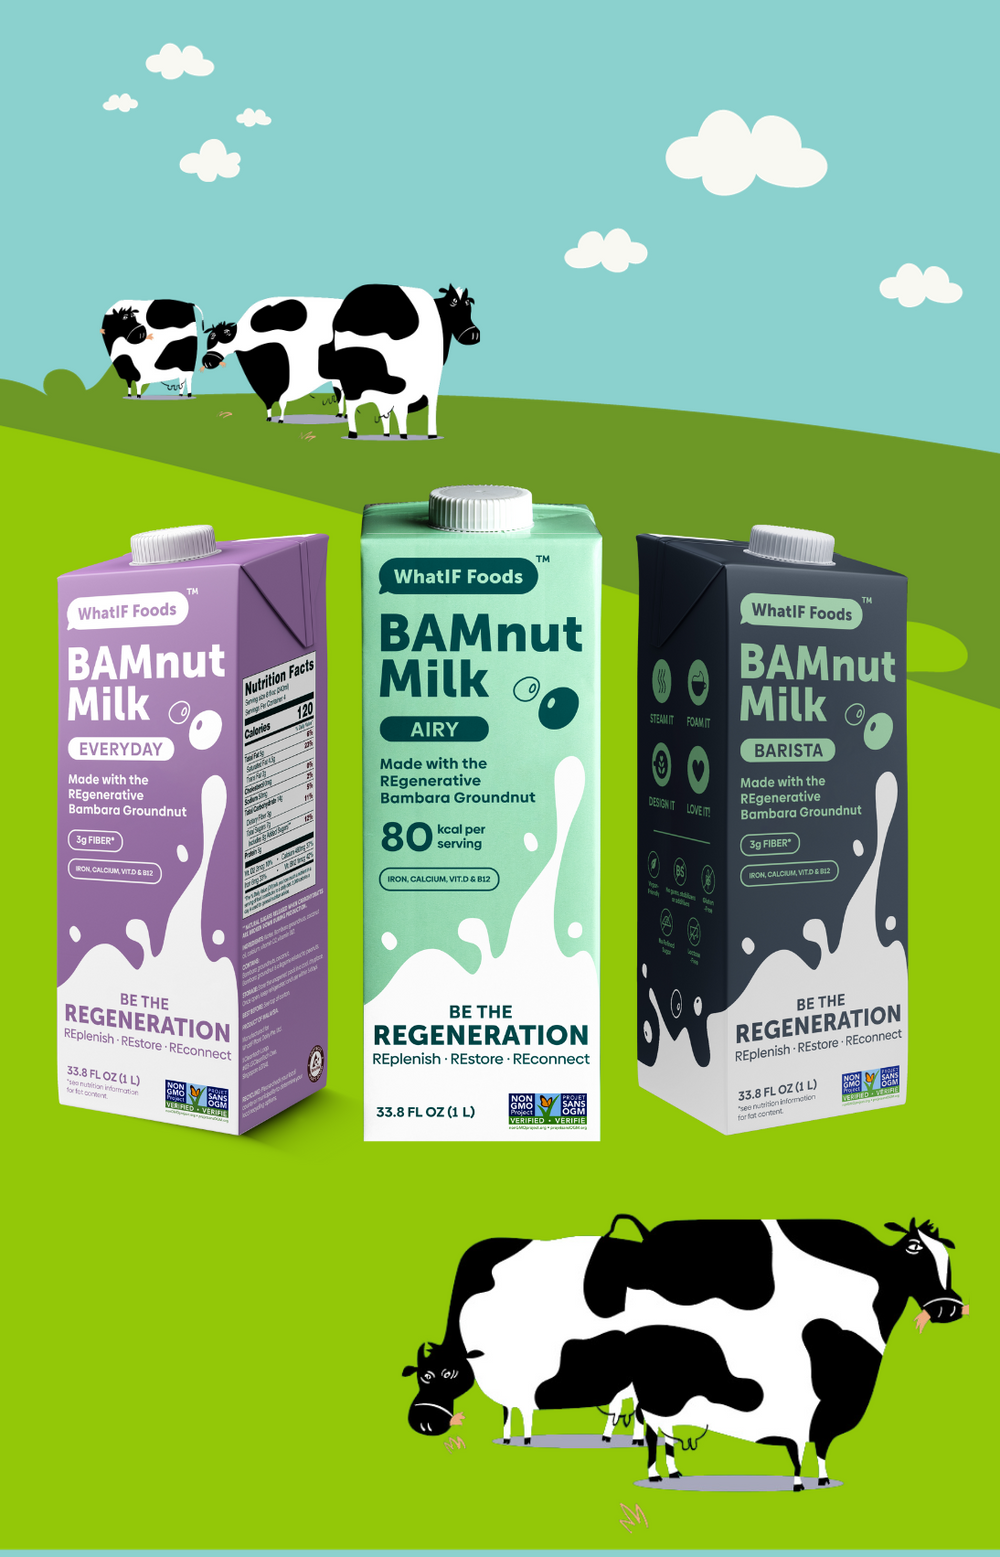 Moo-ving Beyond Dairy: Solving Water Scarcity with the Dairy Replacement, Planet-Based BAMnut Milk